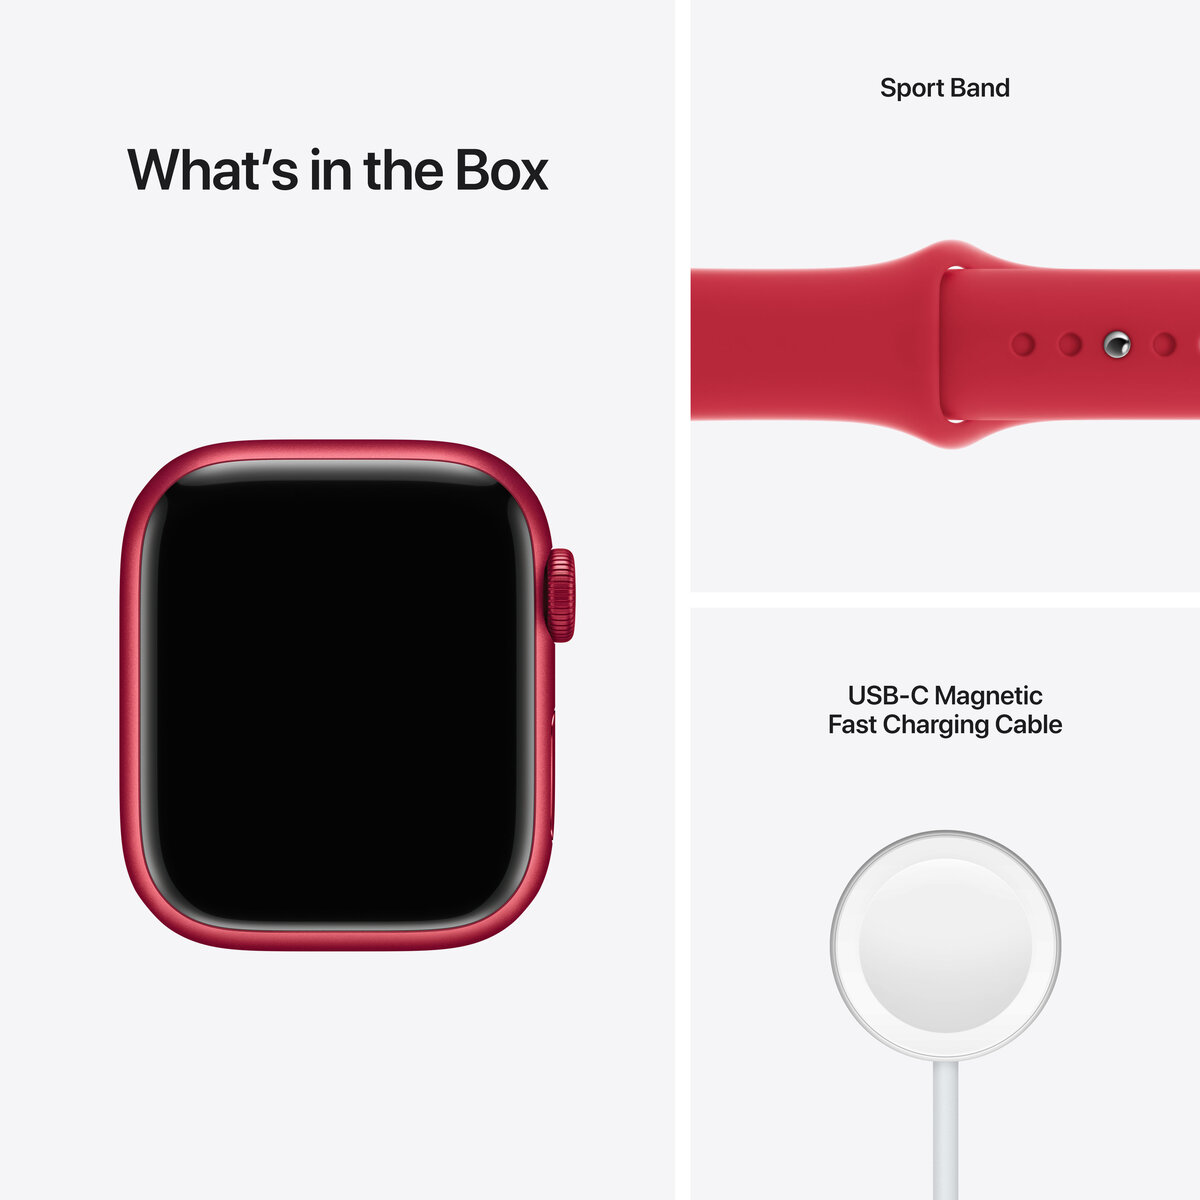 Buy Apple Watch Series 7 GPS + Cellular, 45mm (PRODUCT)RED Aluminium Case with (PRODUCT)RED Sport Band,MKJU3B/A at costco.co.uk